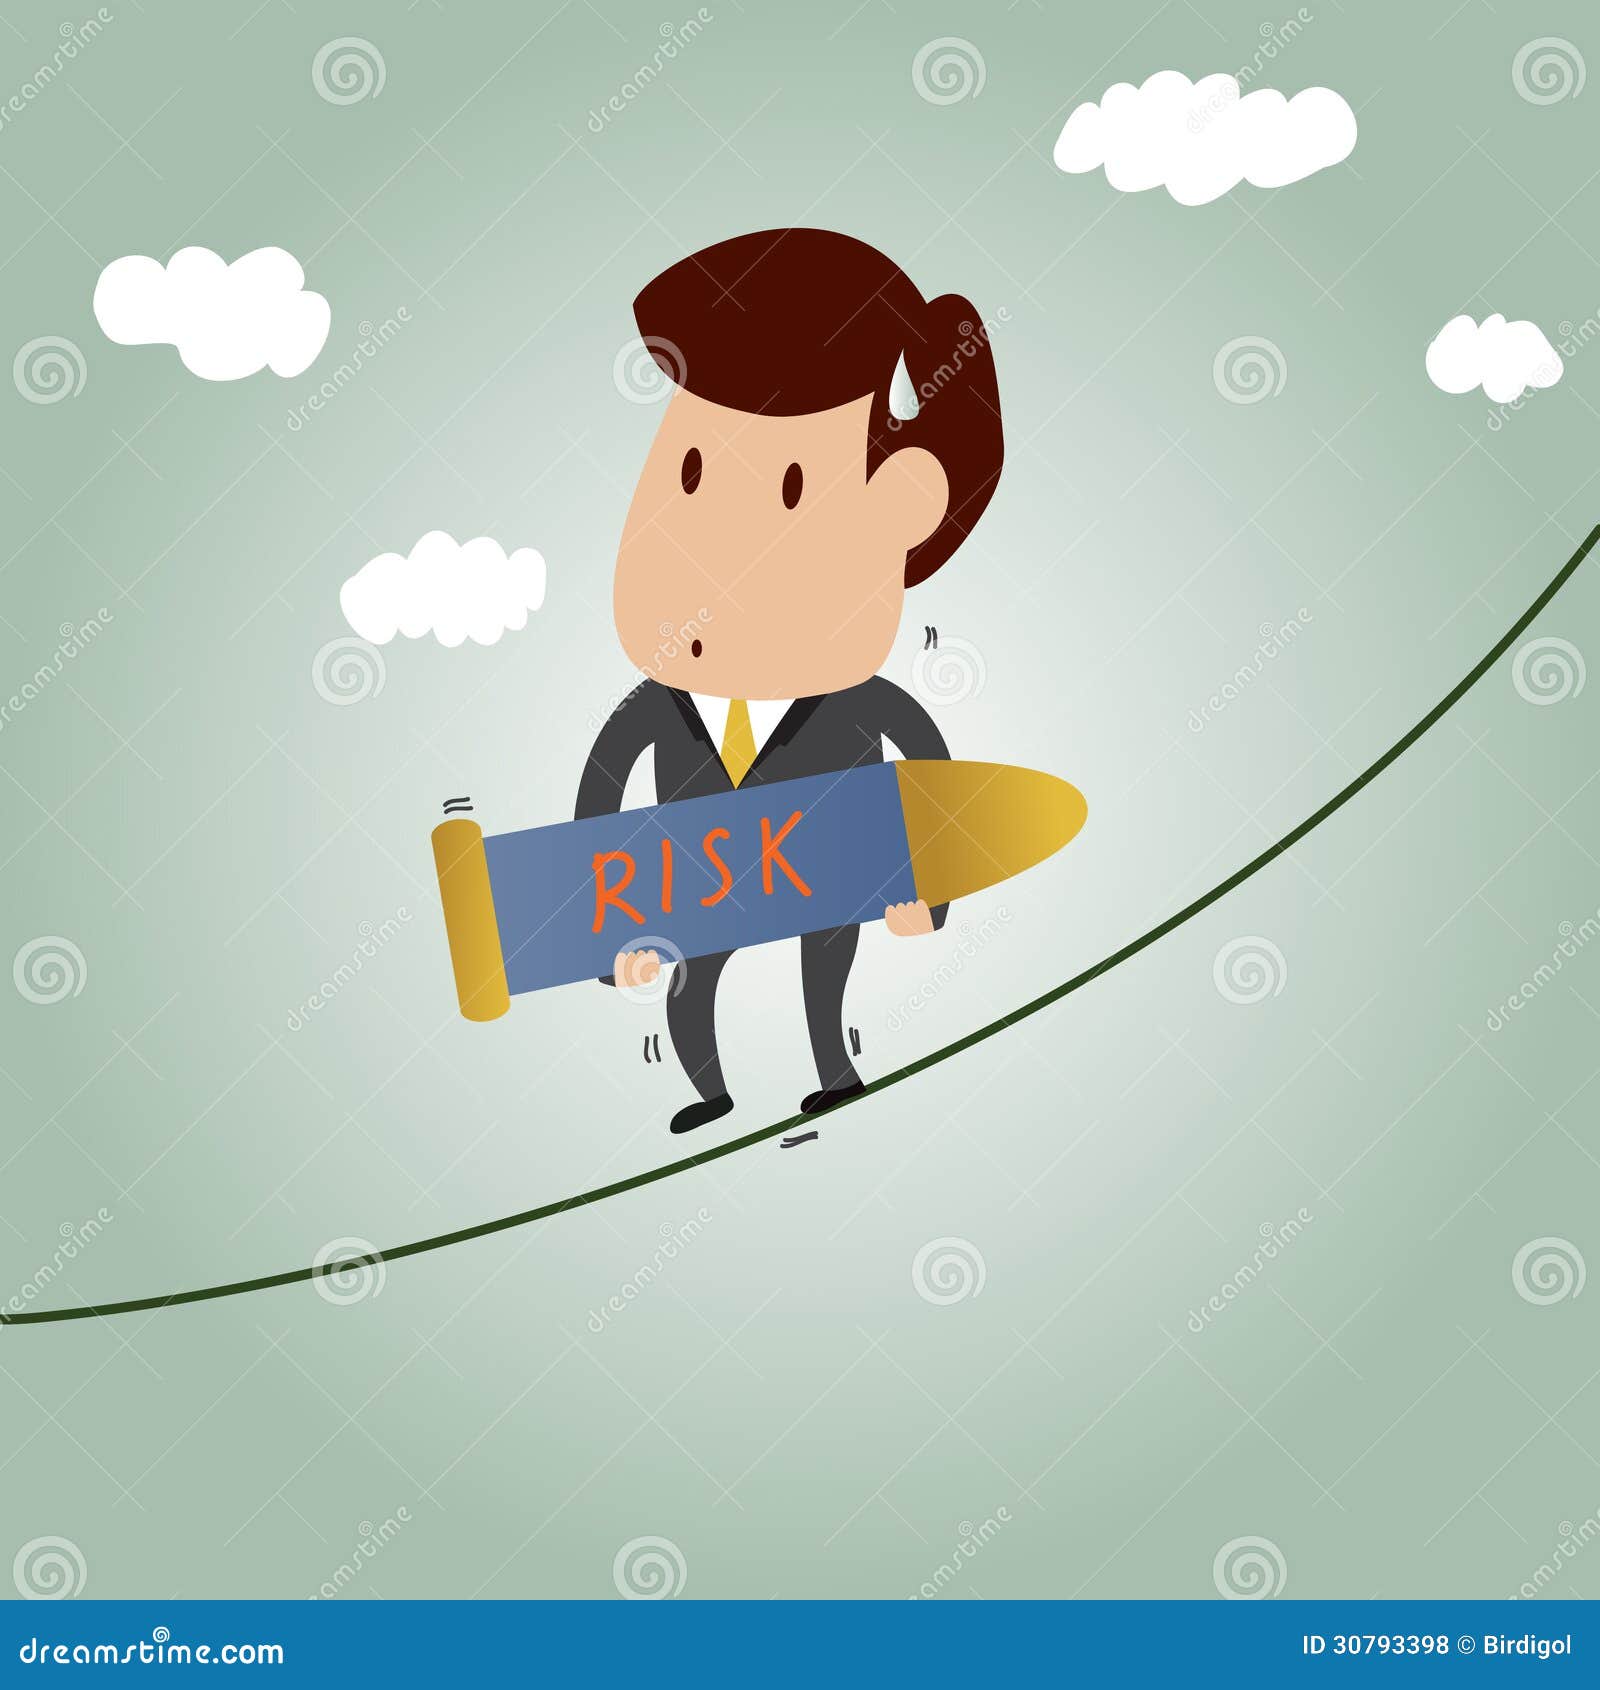 business risk clipart - photo #26